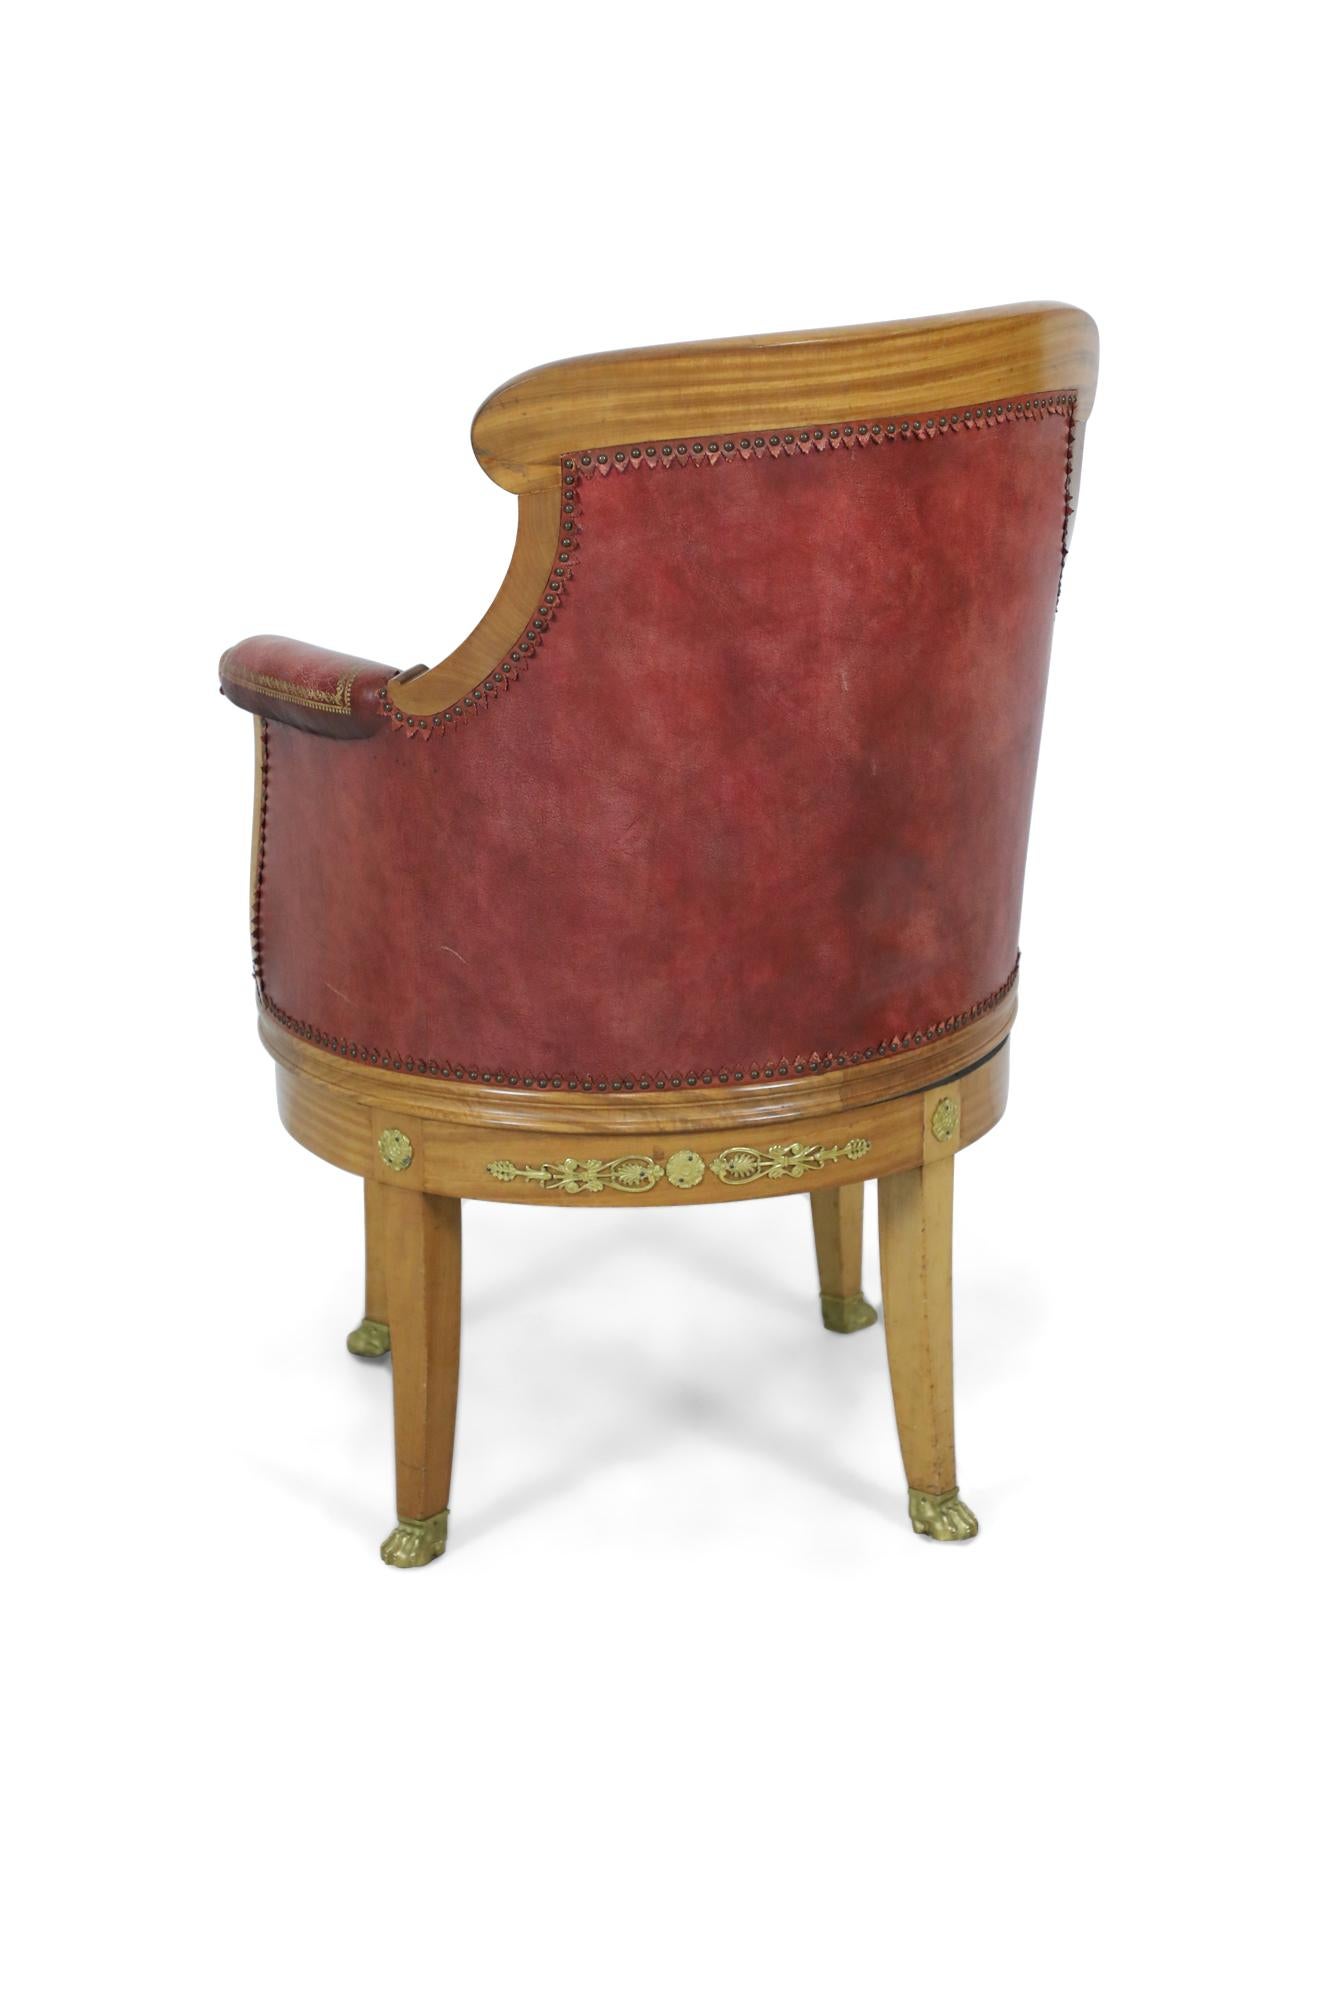 19th Century French Empire Blond Mahogany Swivel Leather Chair with Bronze Trim For Sale